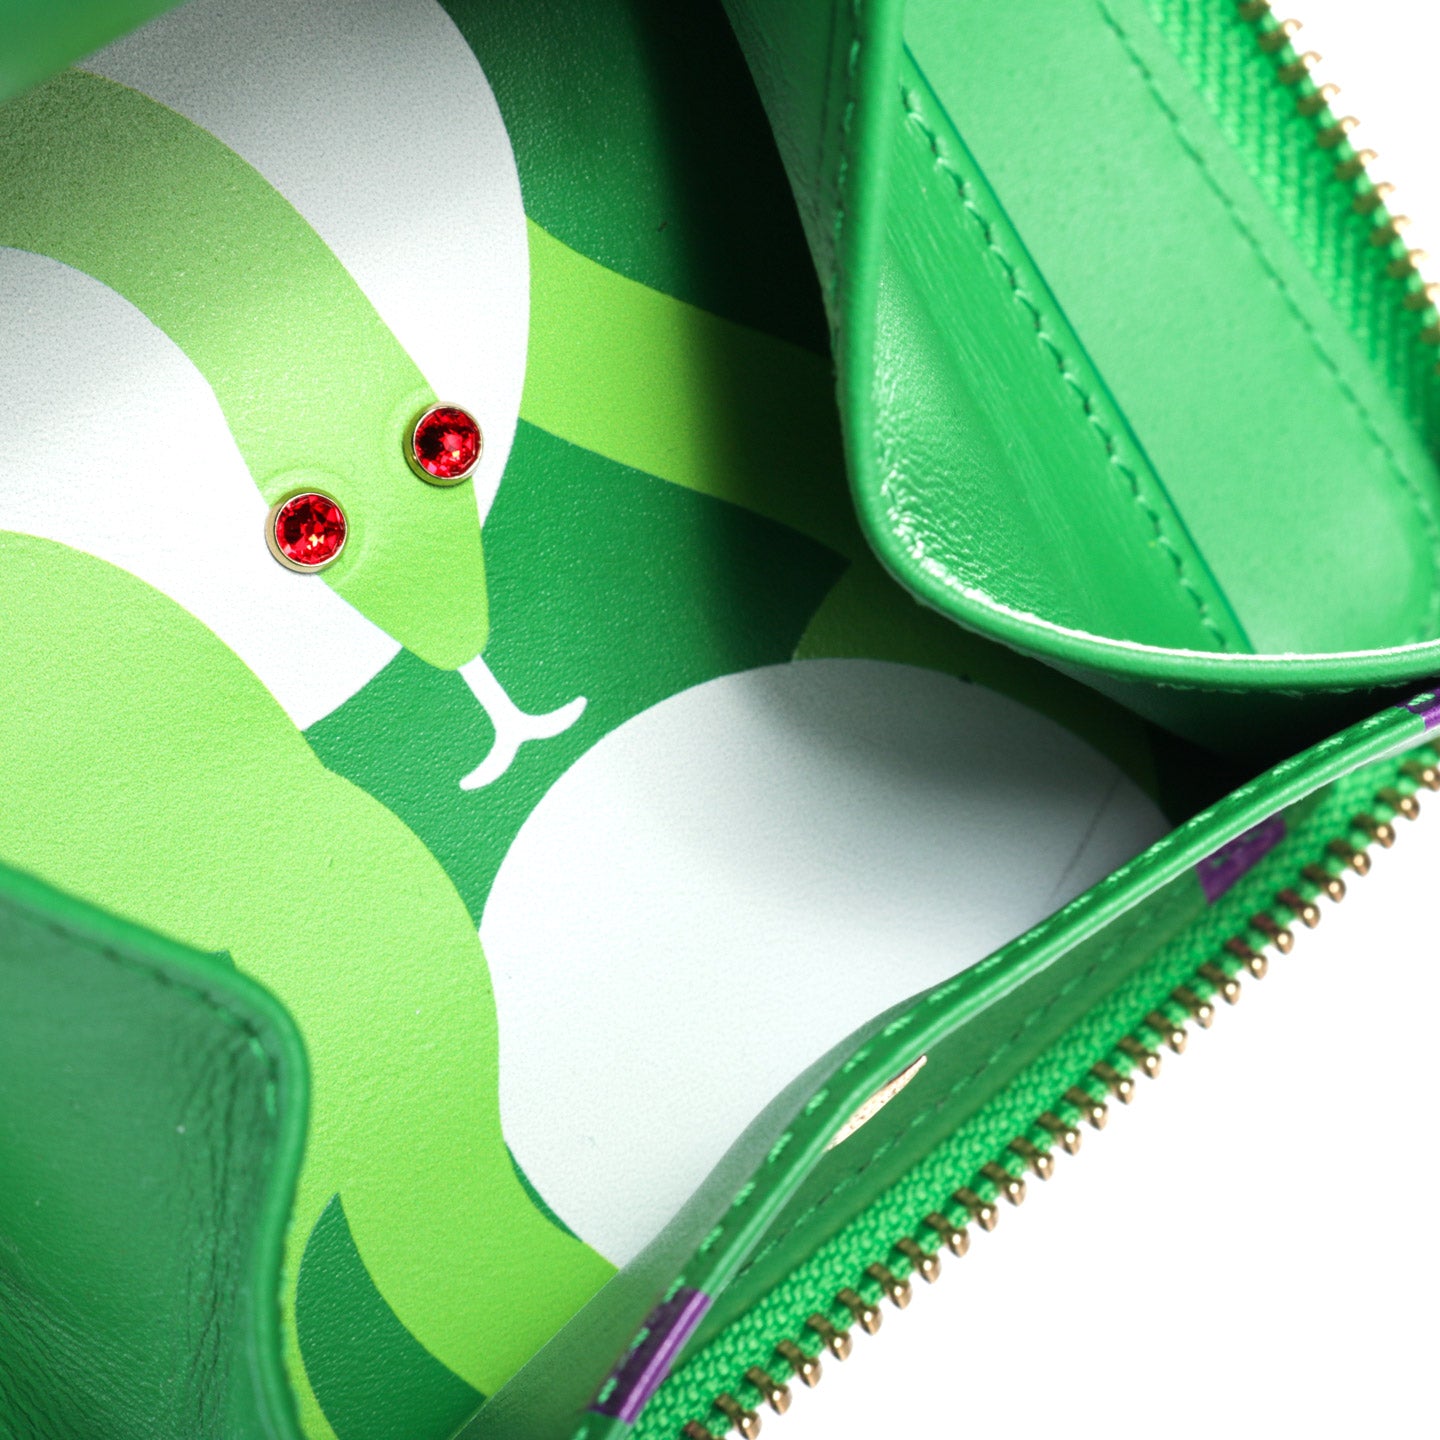 COMME DES GARCONS SA2100 RUBY EYES ZIP WALLET GREEN